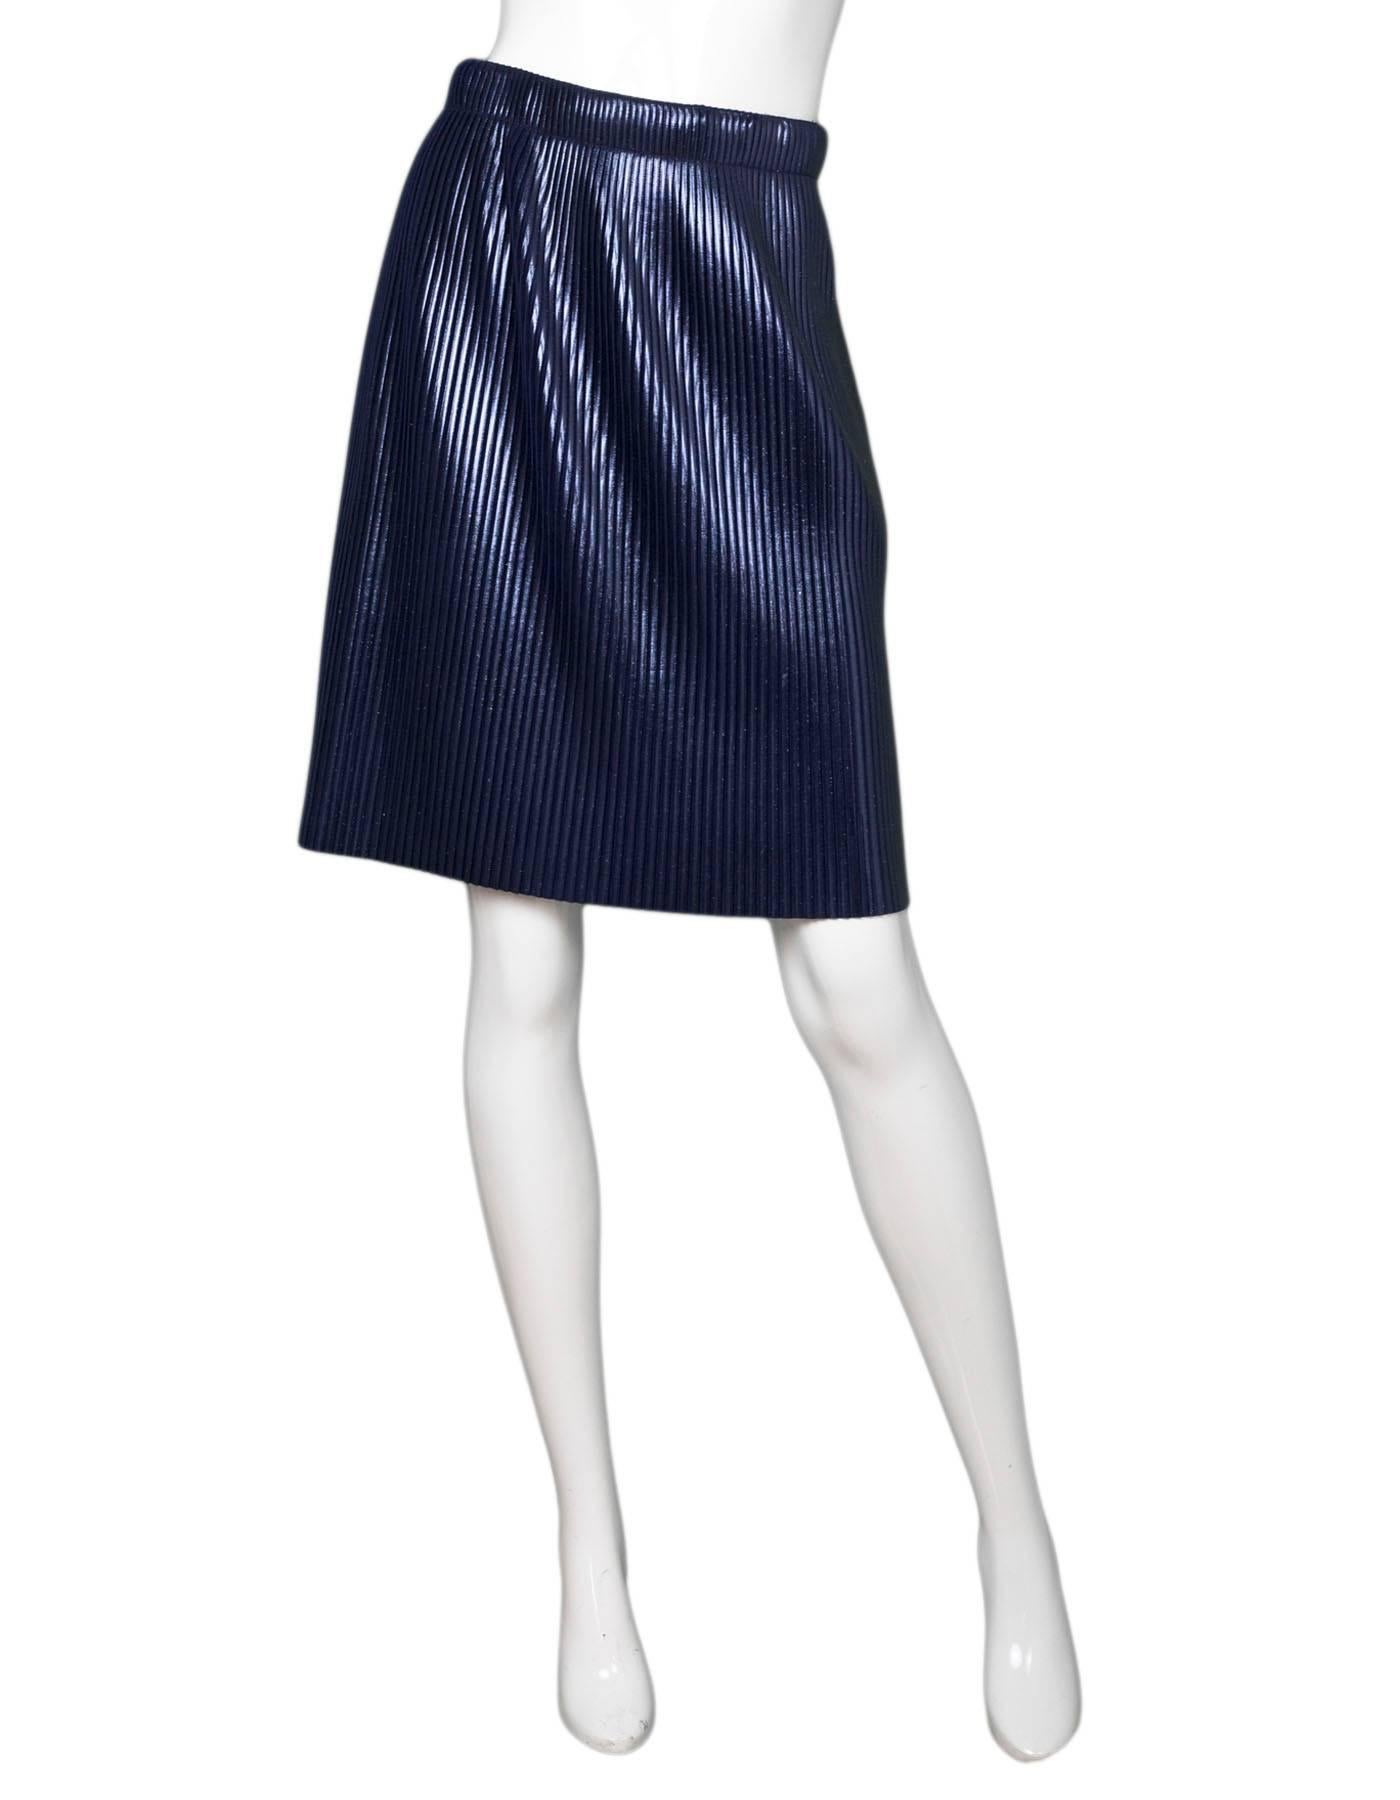 Golden Goose Navy Liza Coated Plisse Skirt Sz XS

Made In: Italy
Color: Navy
Composition: 100% Polyester
Lining: None
Closure/Opening: Stretch wasitband
Retail Price: $500 + tax
Overall Condition: Excellentpre-owned condition
Marked Size: XS
Waist: